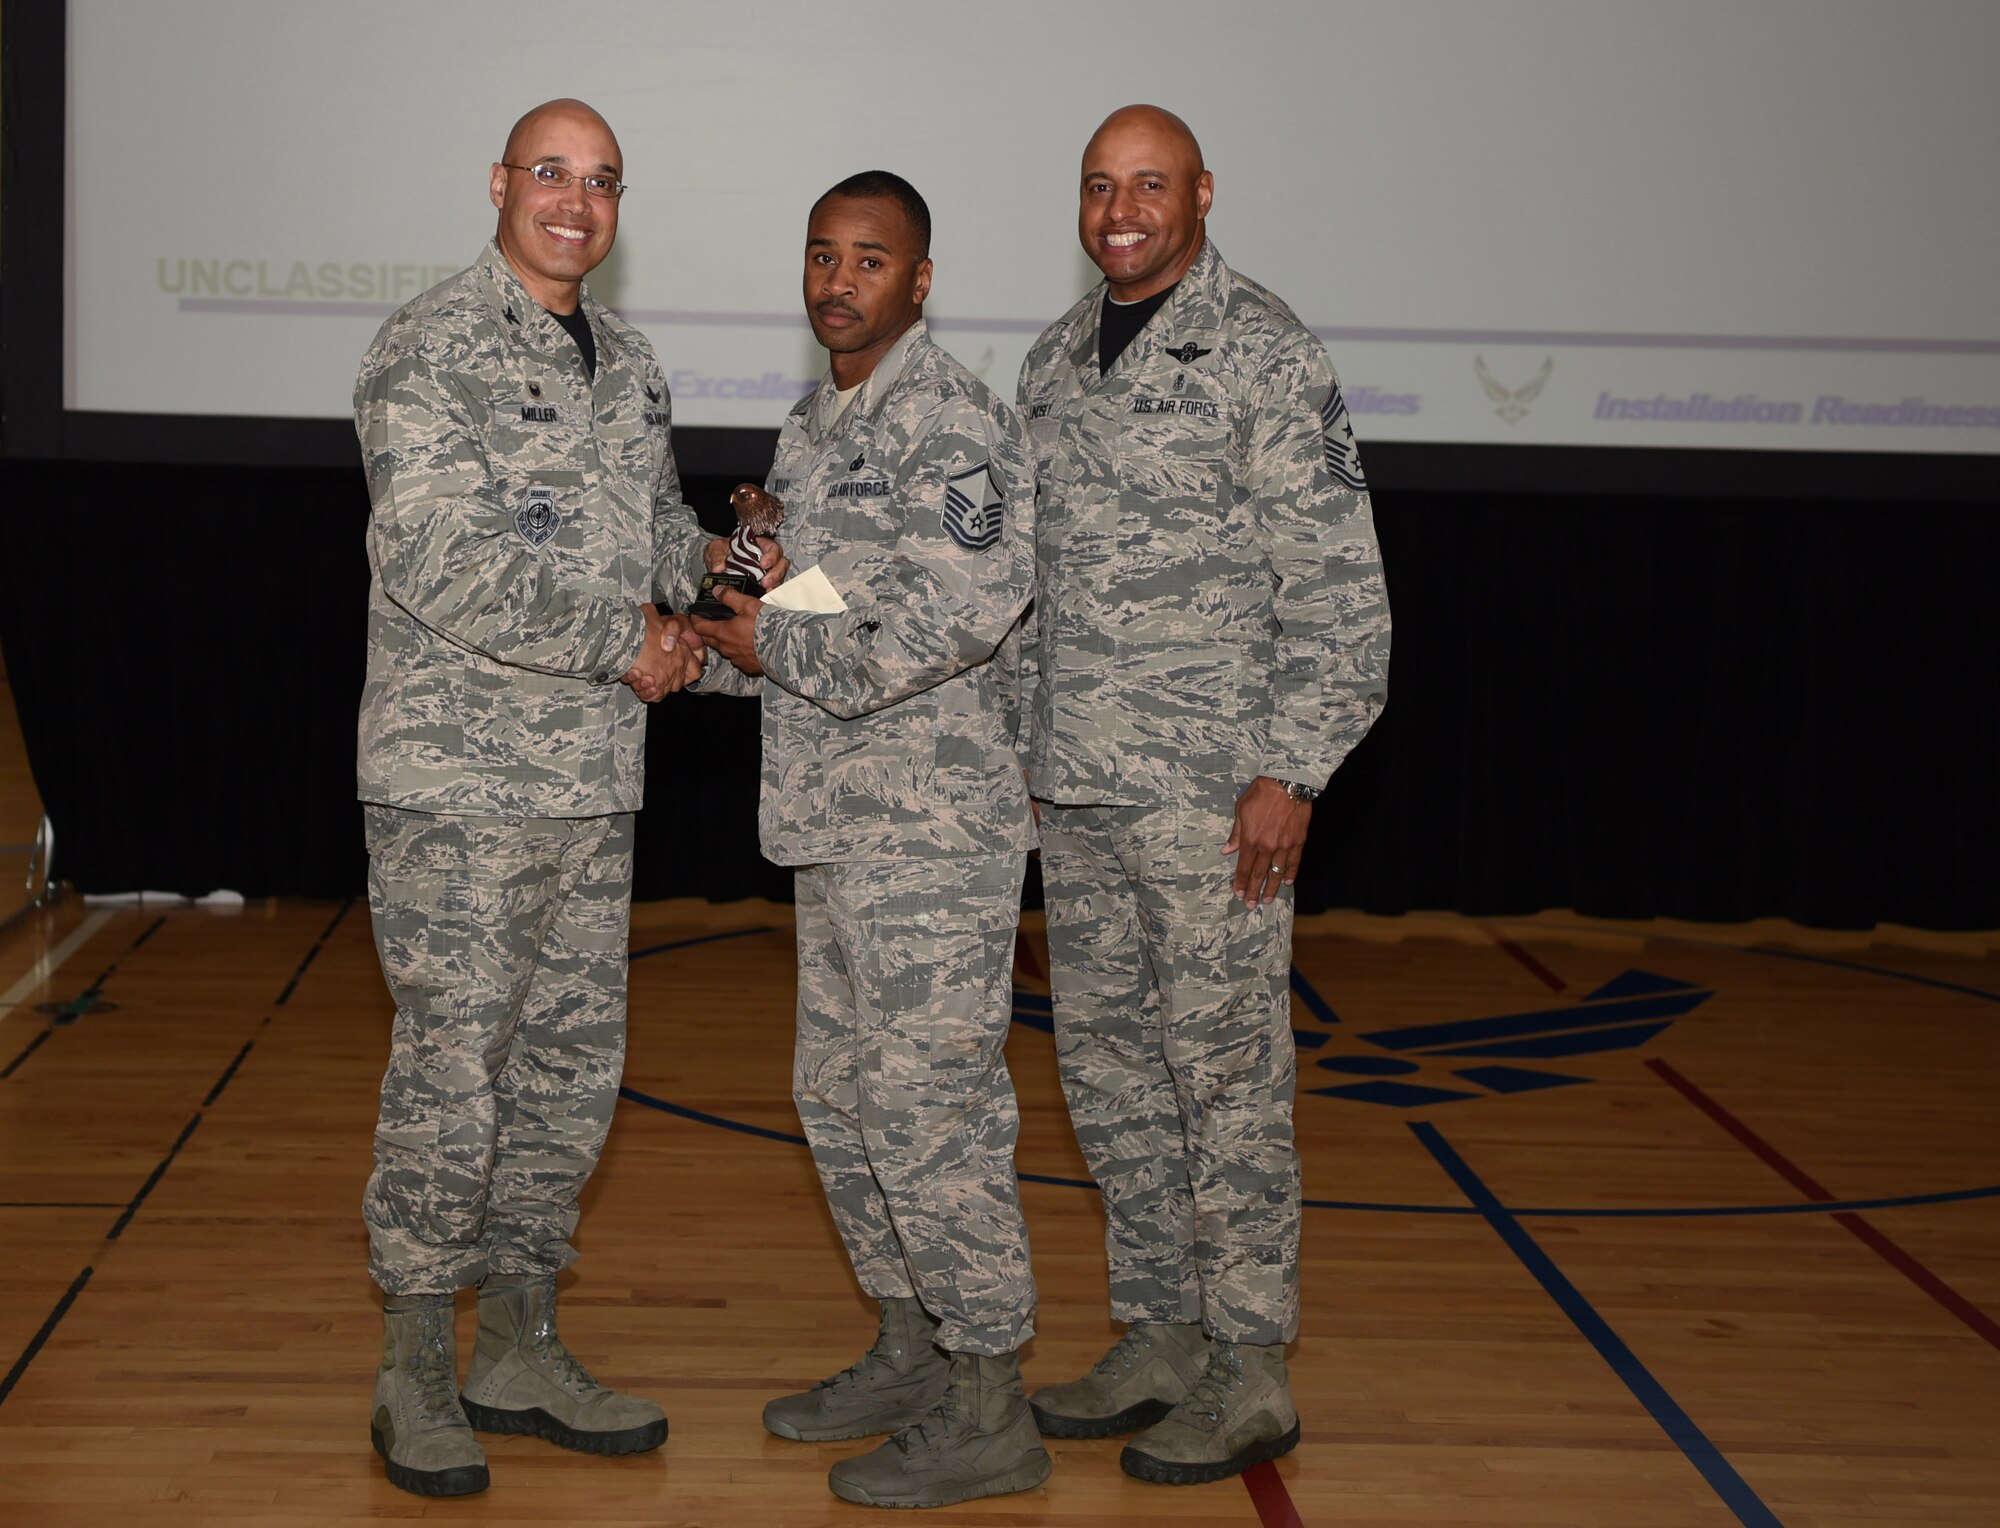 Master Sgt. Imari Motley, 460th Force Support Squadron Airman Leadership School commandant, receives the Senior Noncommissioned Officer of the Quart Award May 19, 2017, on Buckley Air Force Base, Colo.  Awards were given to the Team Buckley members who showed dedication, hard work and exceeded their supervisor’s expectations. (U.S. Air Force photo by Airman 1st Class Holden S. Faul/ released)